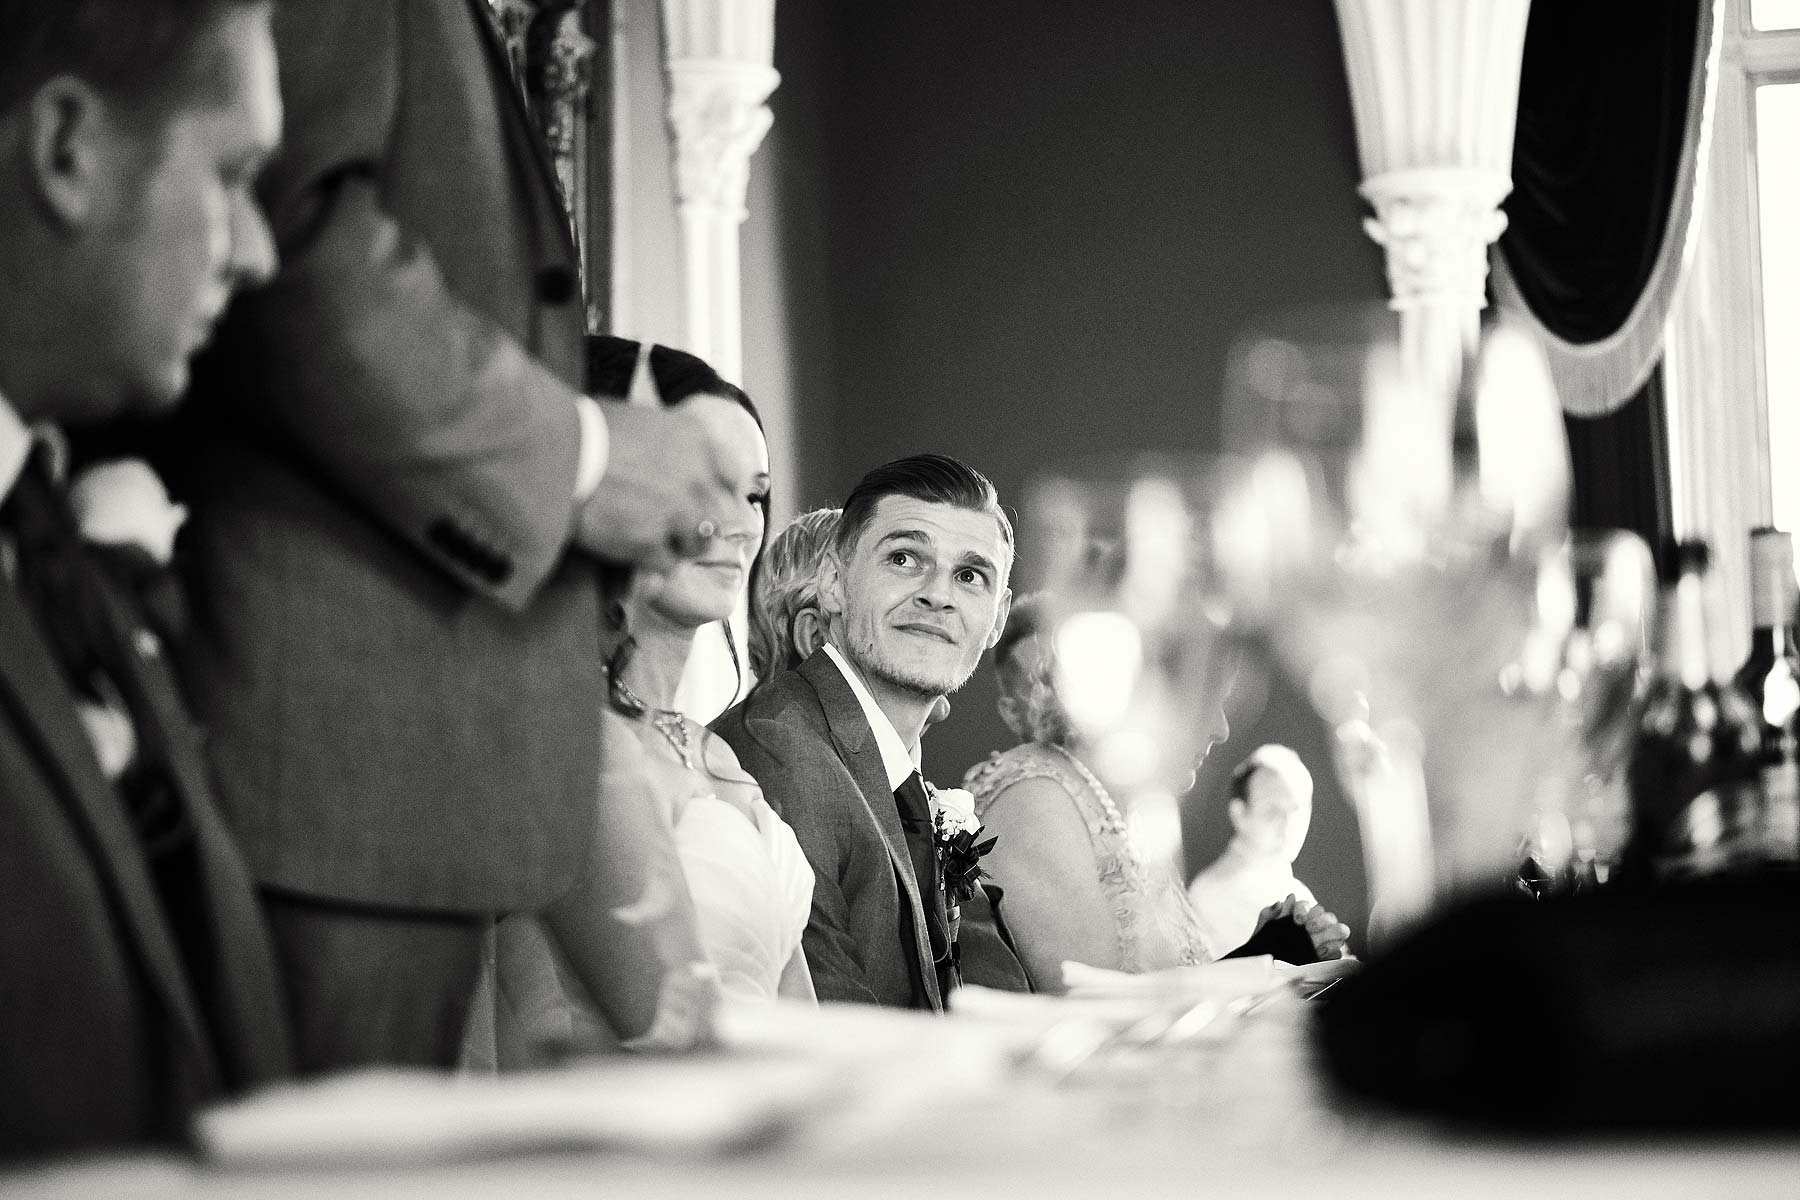 Capturing the reactions to the entertaining and emotional speeches at Allerton Castle in Yorkshire by Documentary Wedding Photographer Stuart James